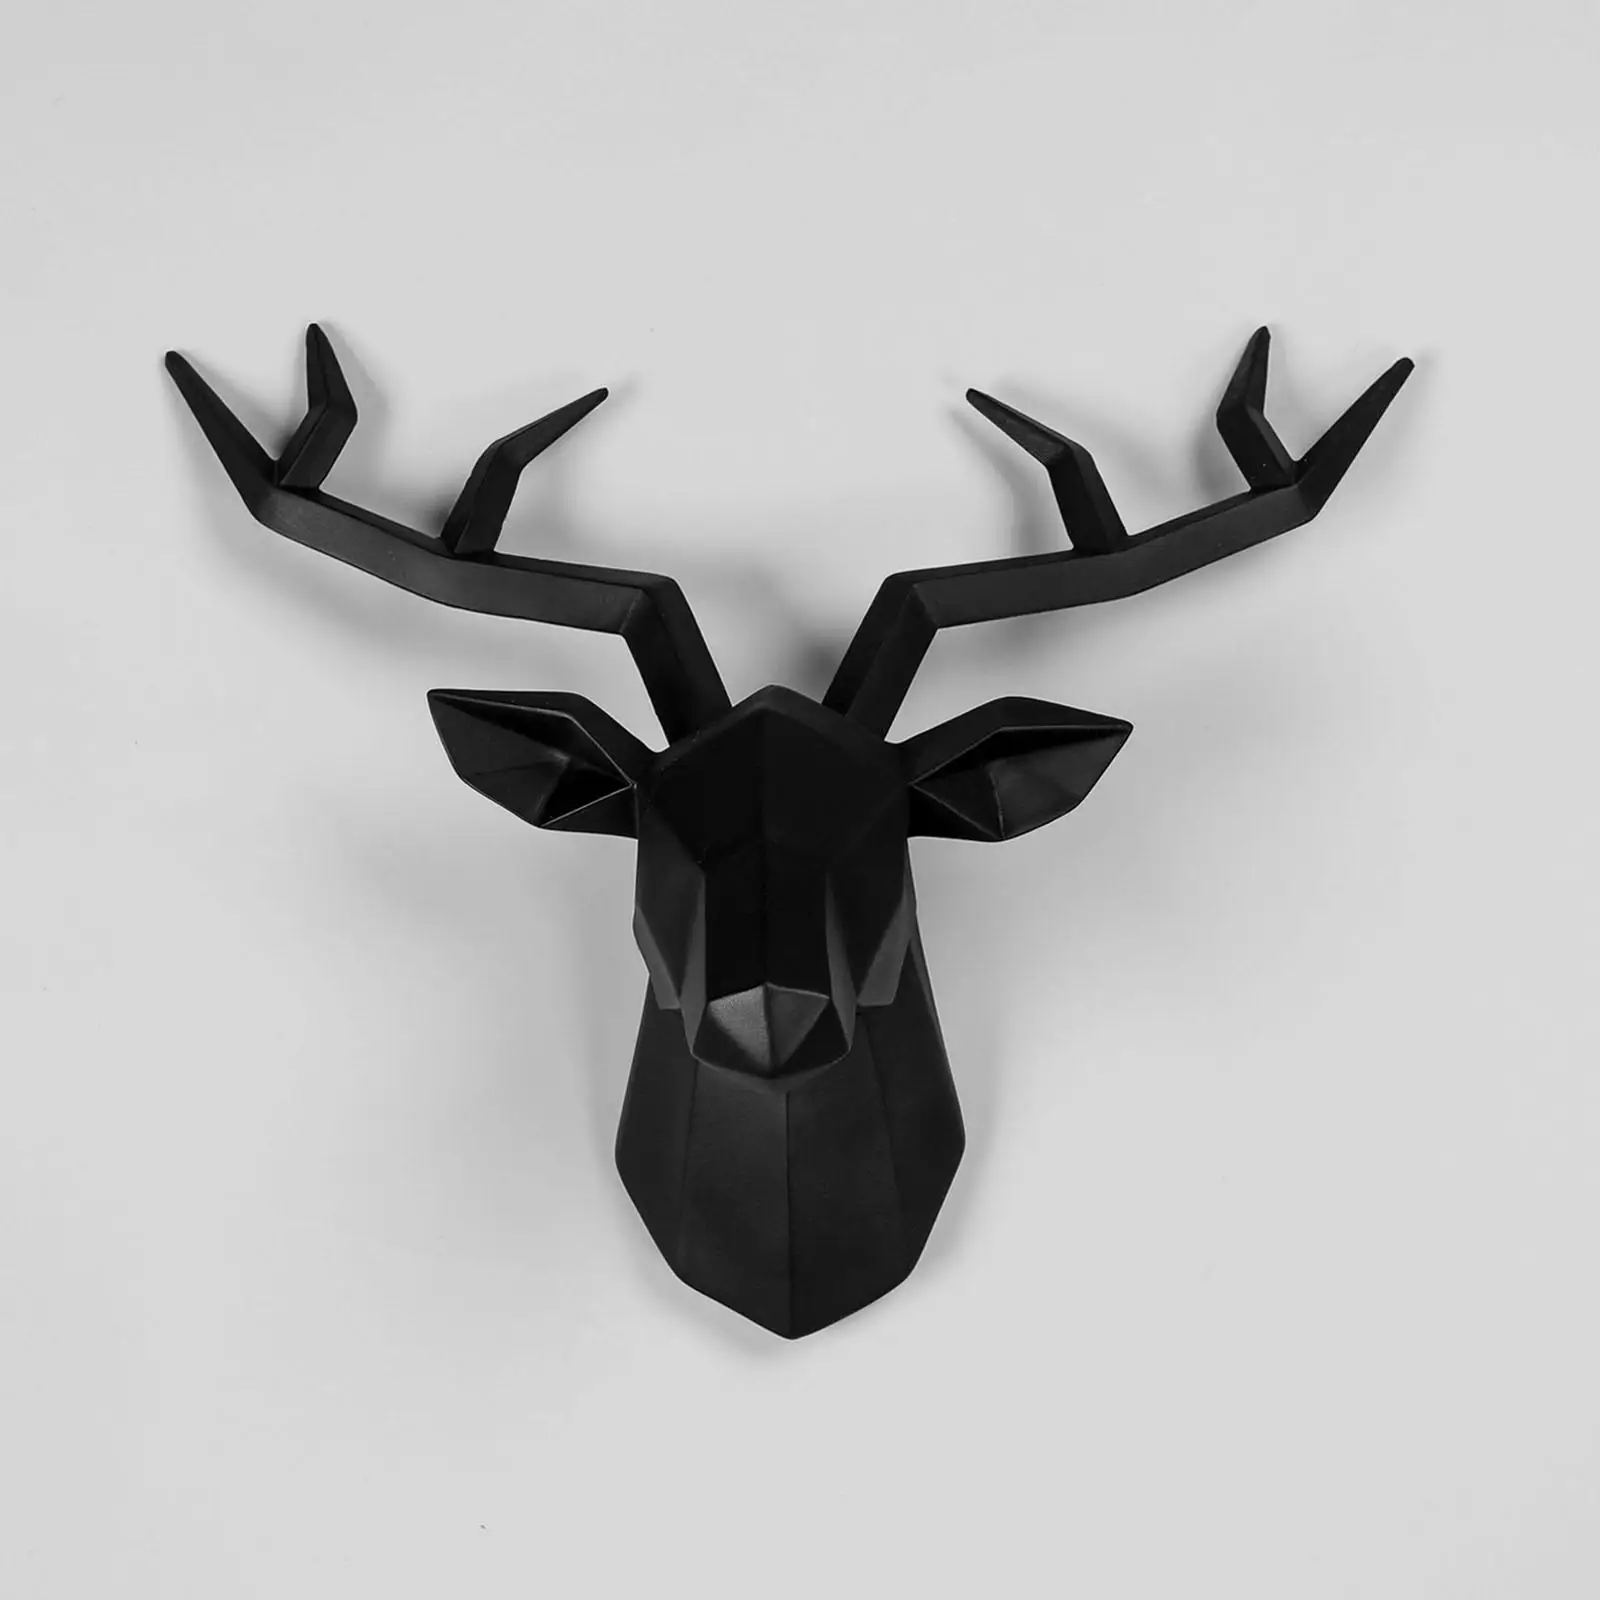  Head Sculpture Animal Statue Figurines Wall Mounted Simulation Collection Pendant Crafts Antlers Statuette for Farmhouse Decor